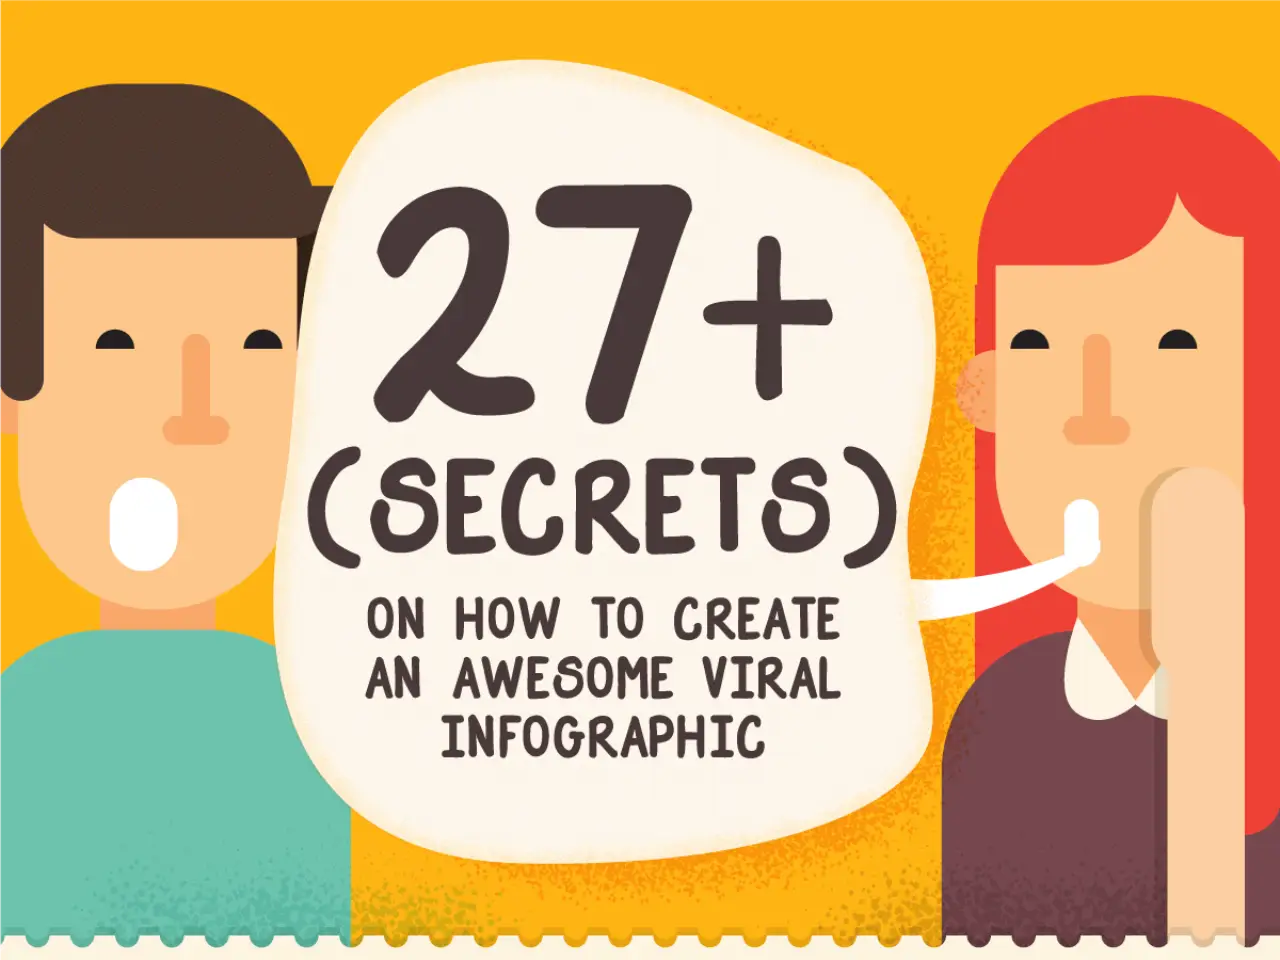 Secrets to Creating an Awesome Viral Infographic